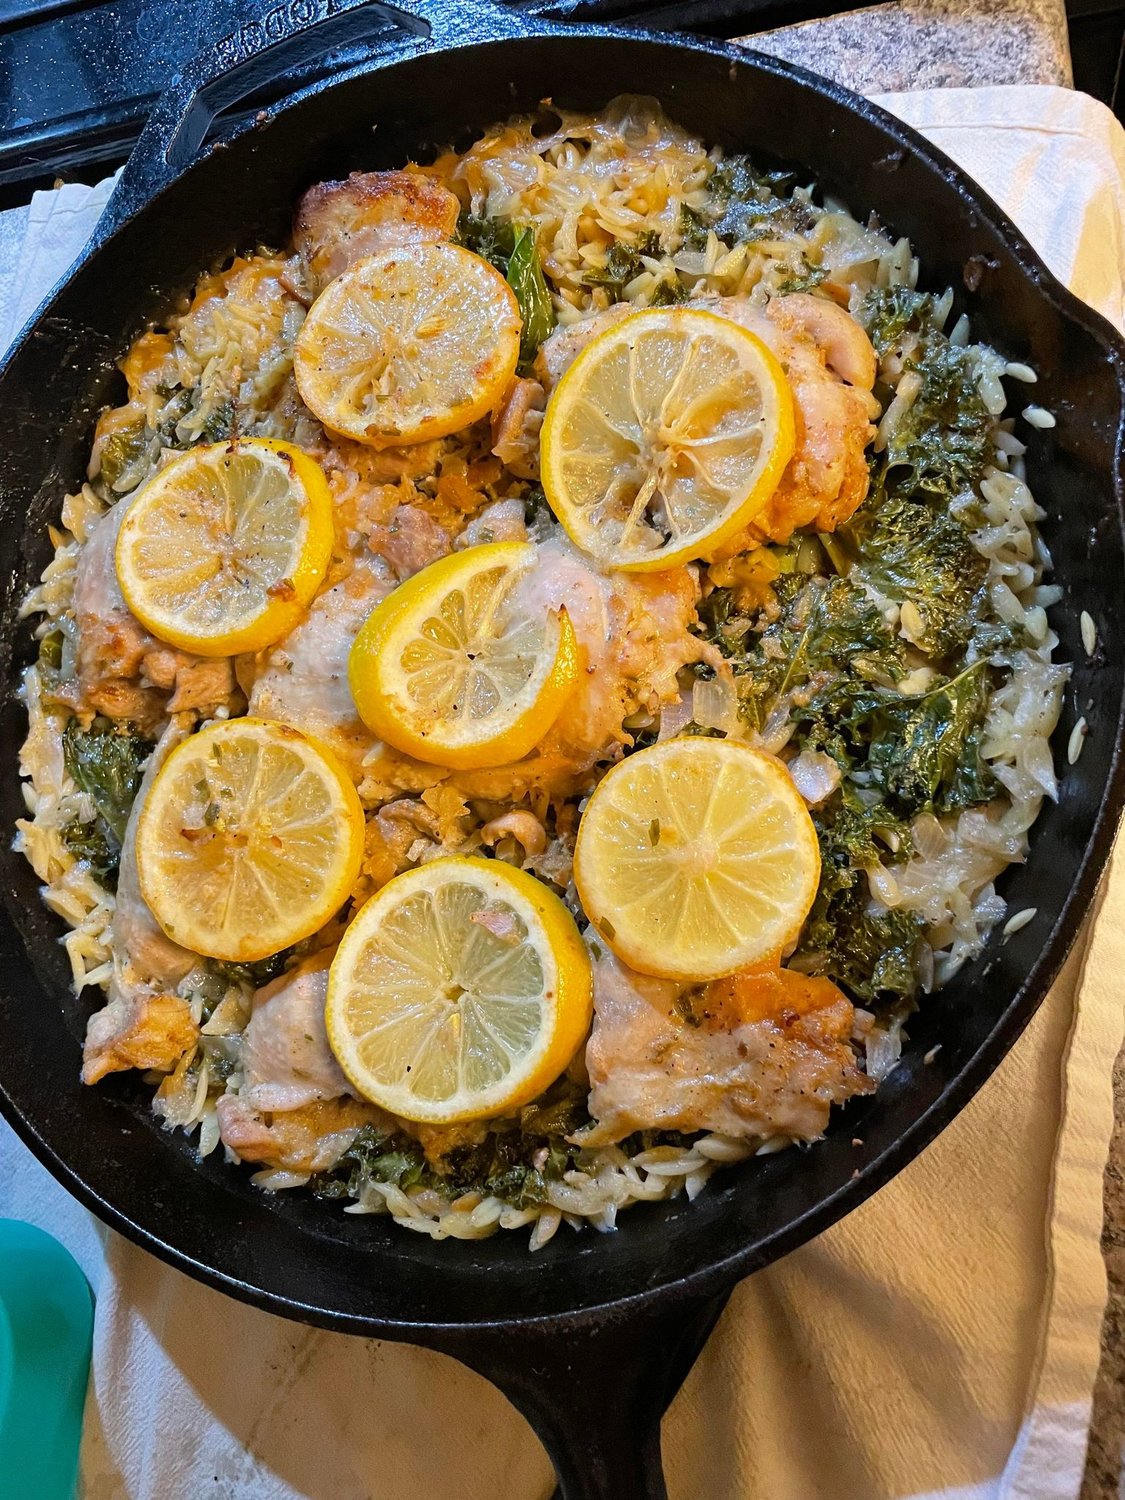 Kristen Maiorano, Bayport
Lemon butter dijon chicken with orzo and kale, served with a garlic feta sauce